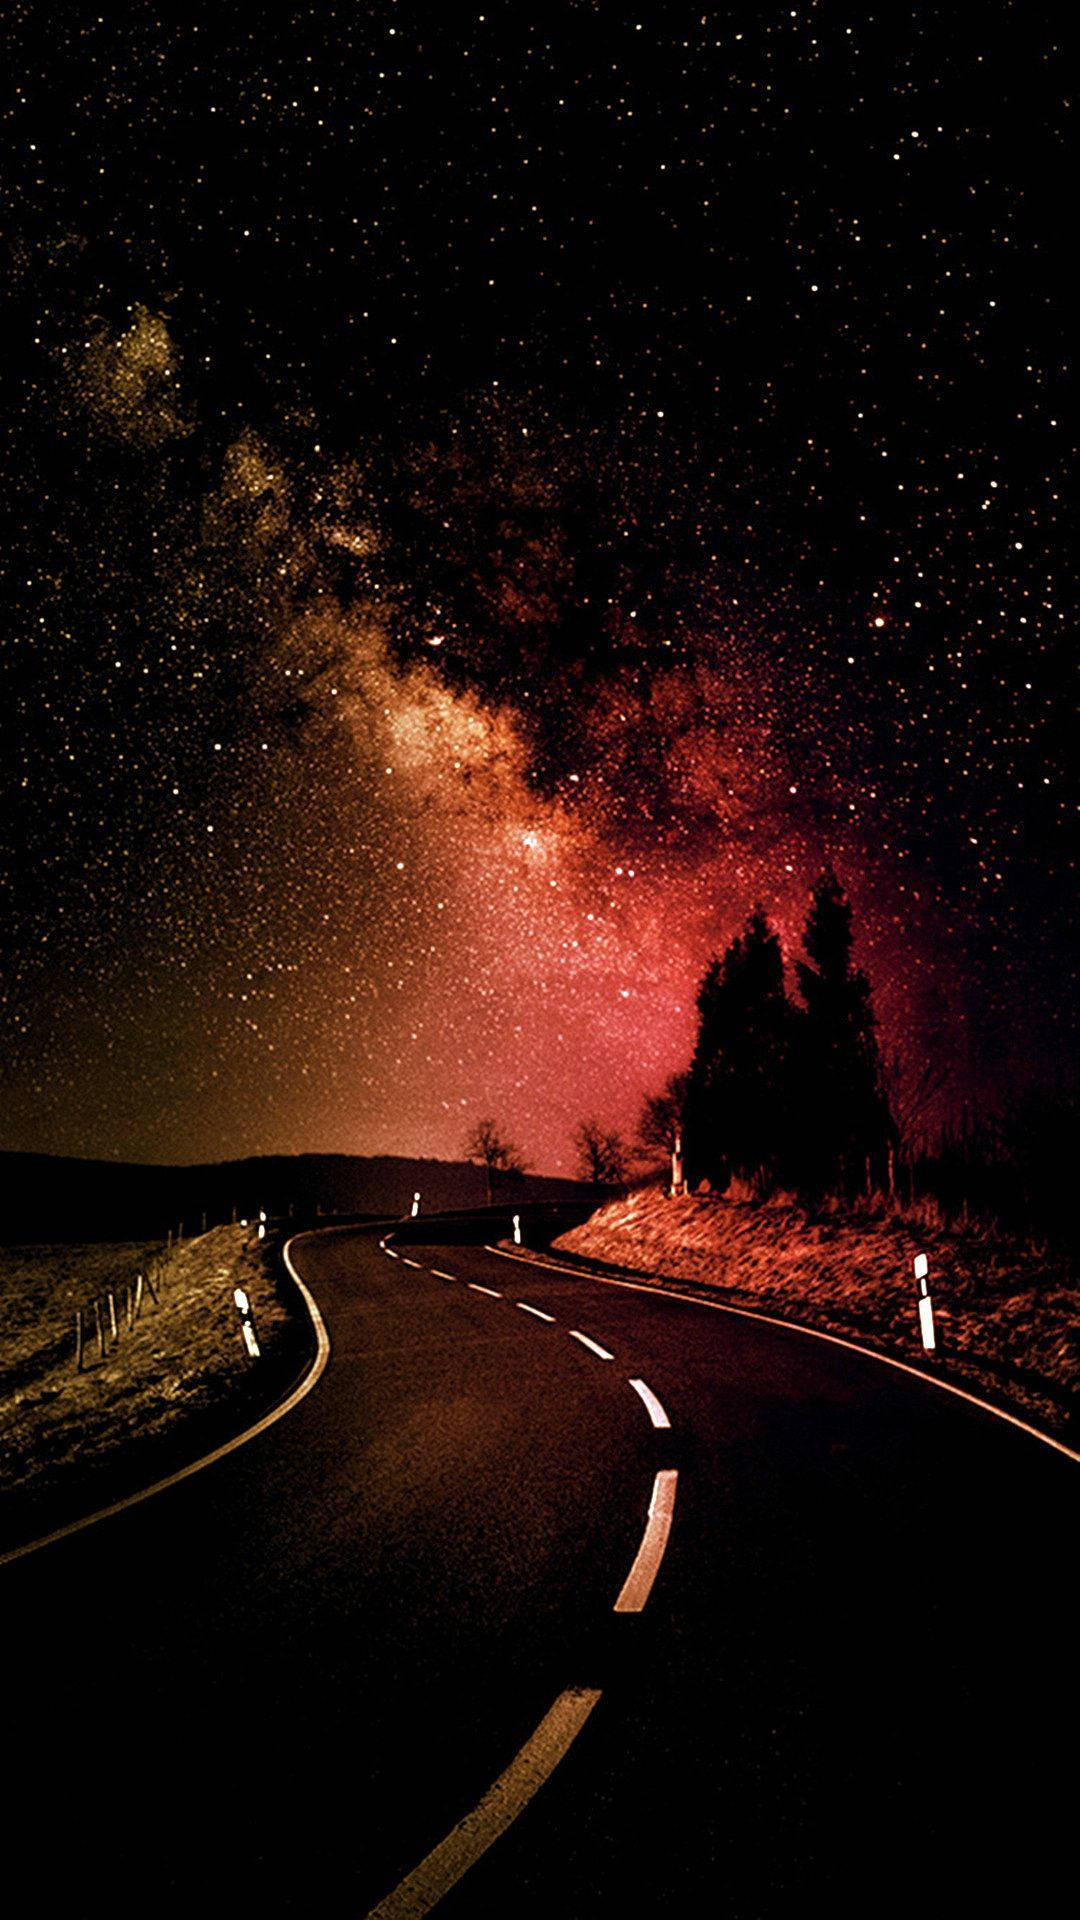 HD wallpaper of road under the pink cosmic galaxy. 